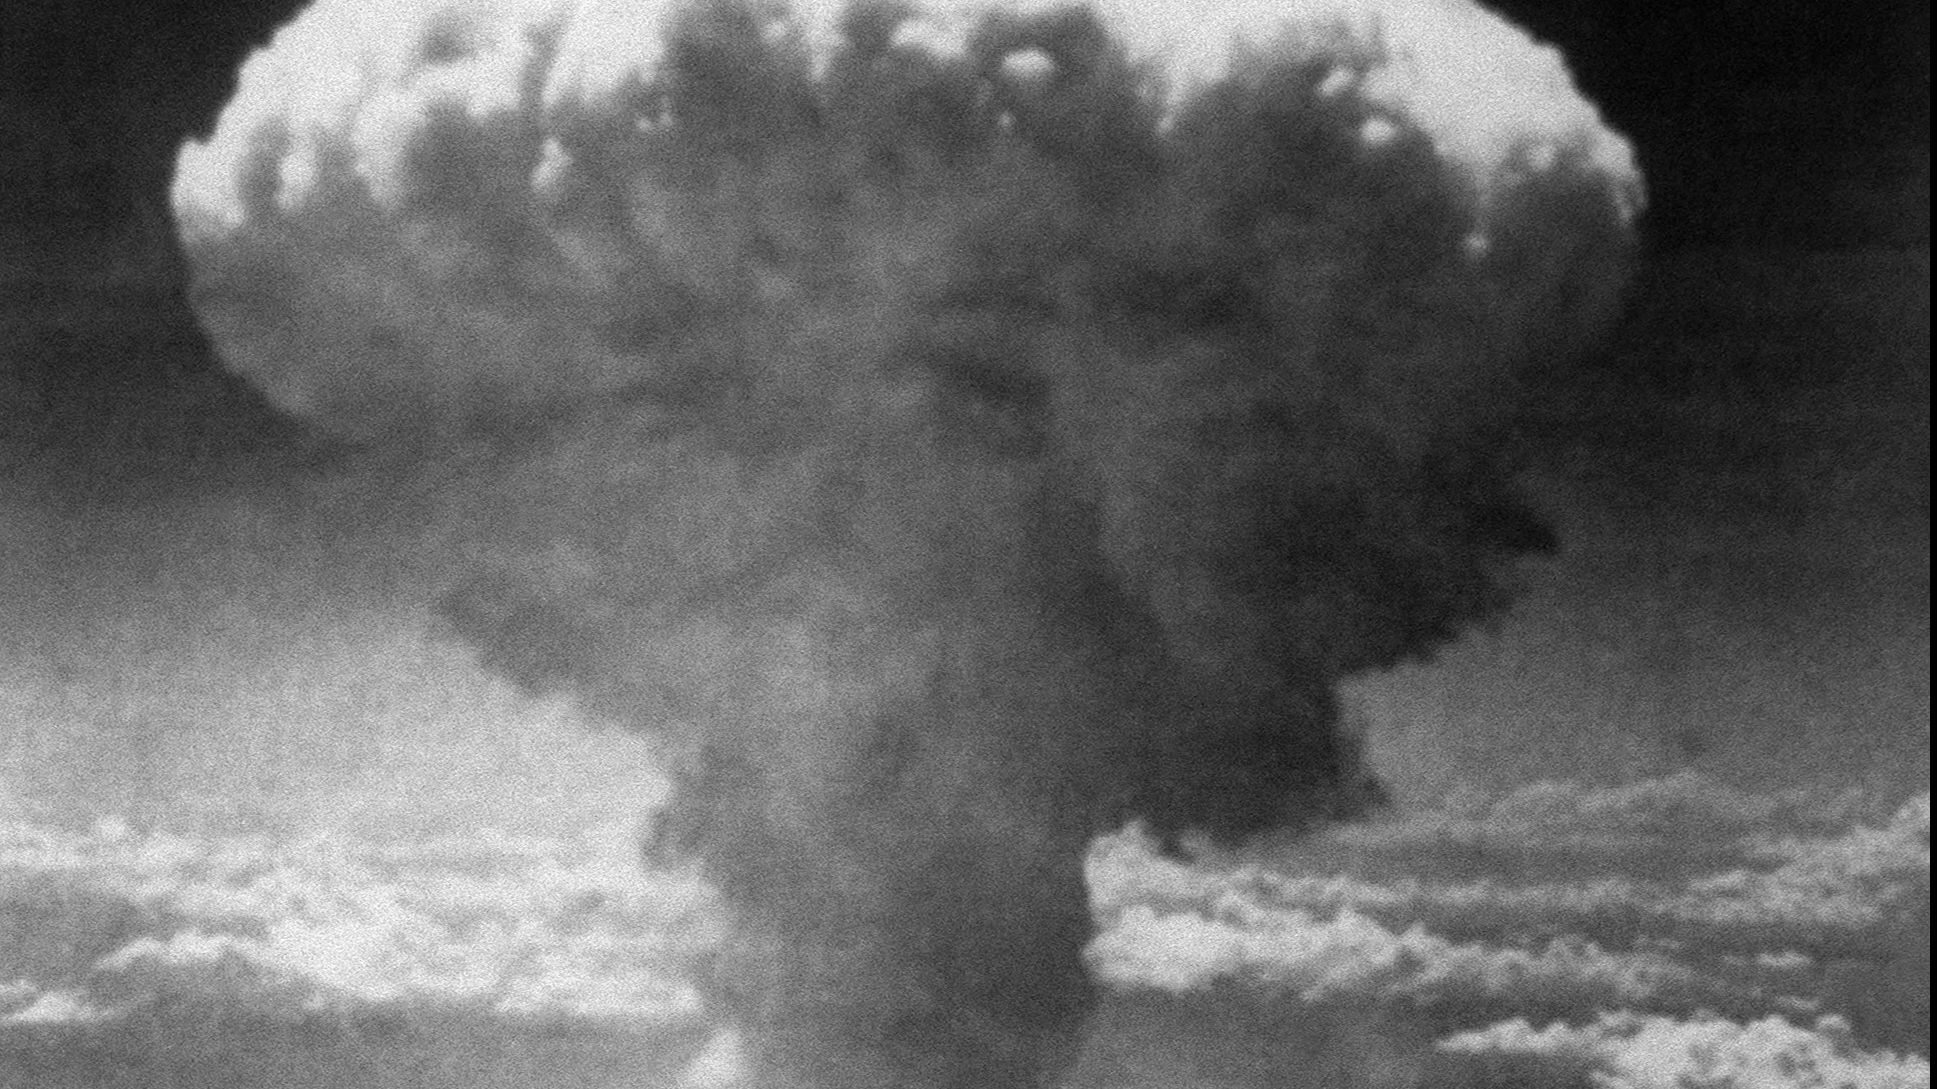 Hiroshima bombing anniversary: Trail of devastation caused by Little Boy and Fat Man